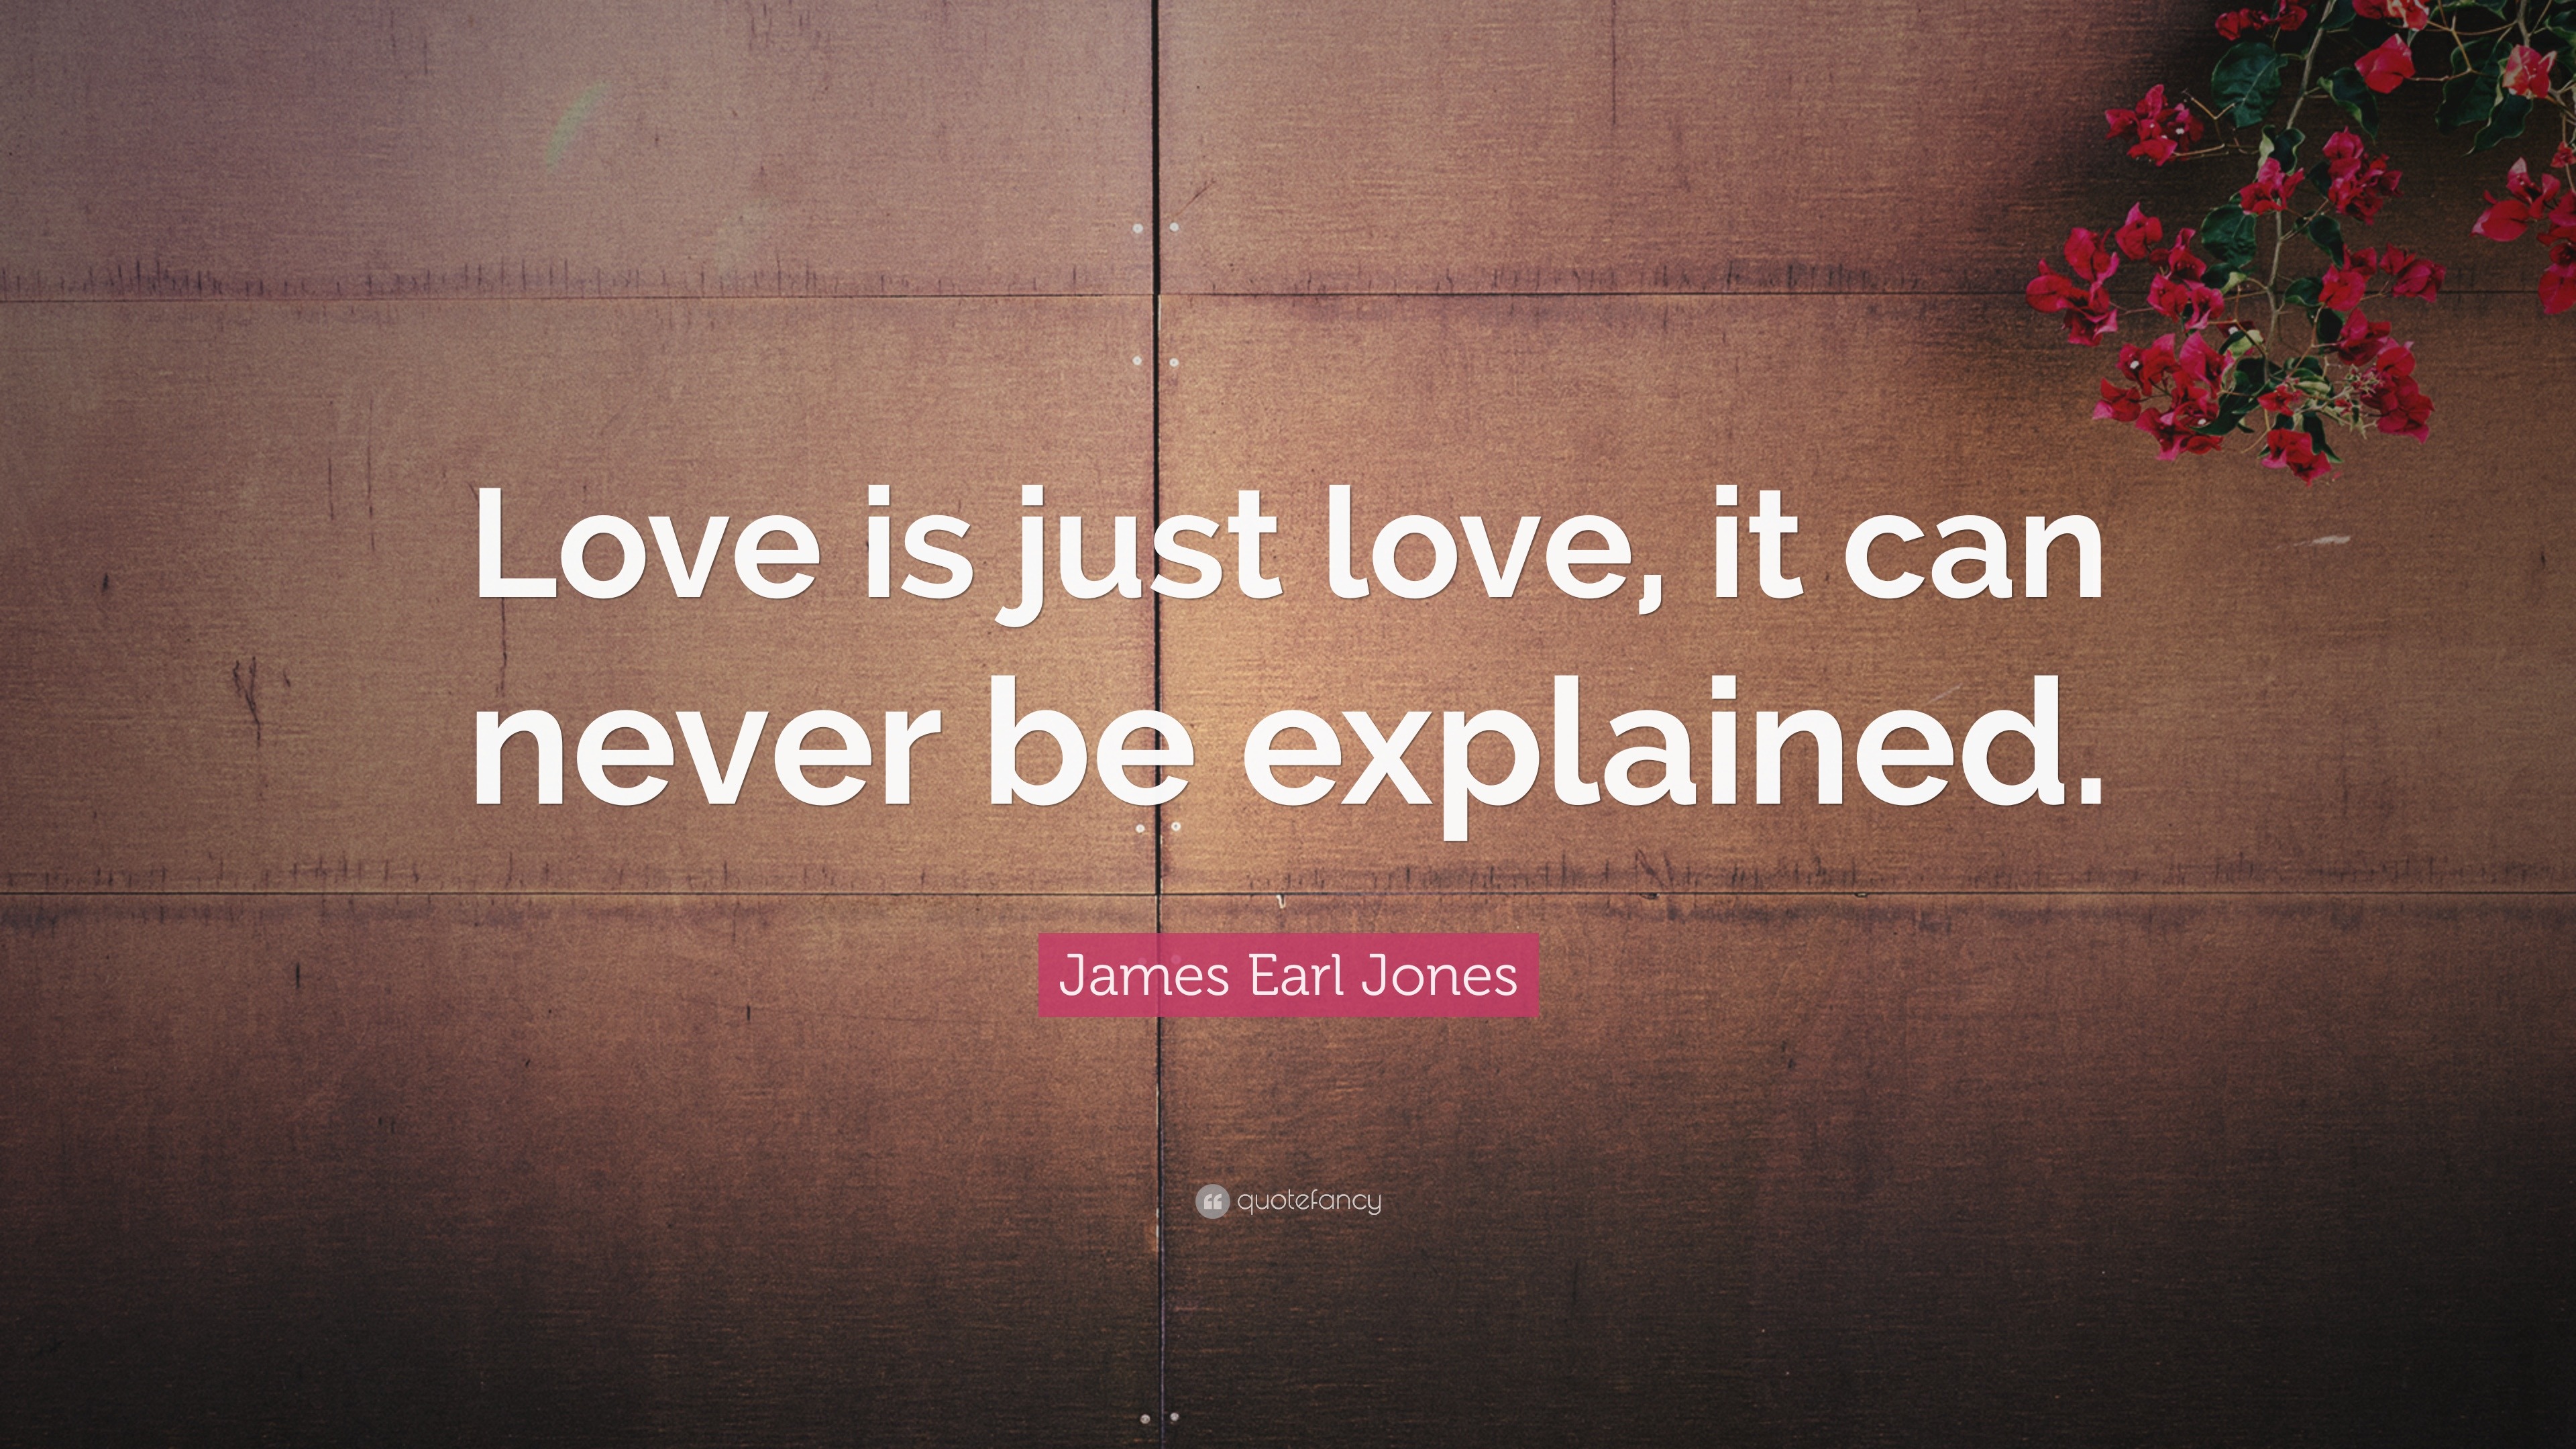 James Earl Jones Quote “Love is just love it can never be explained